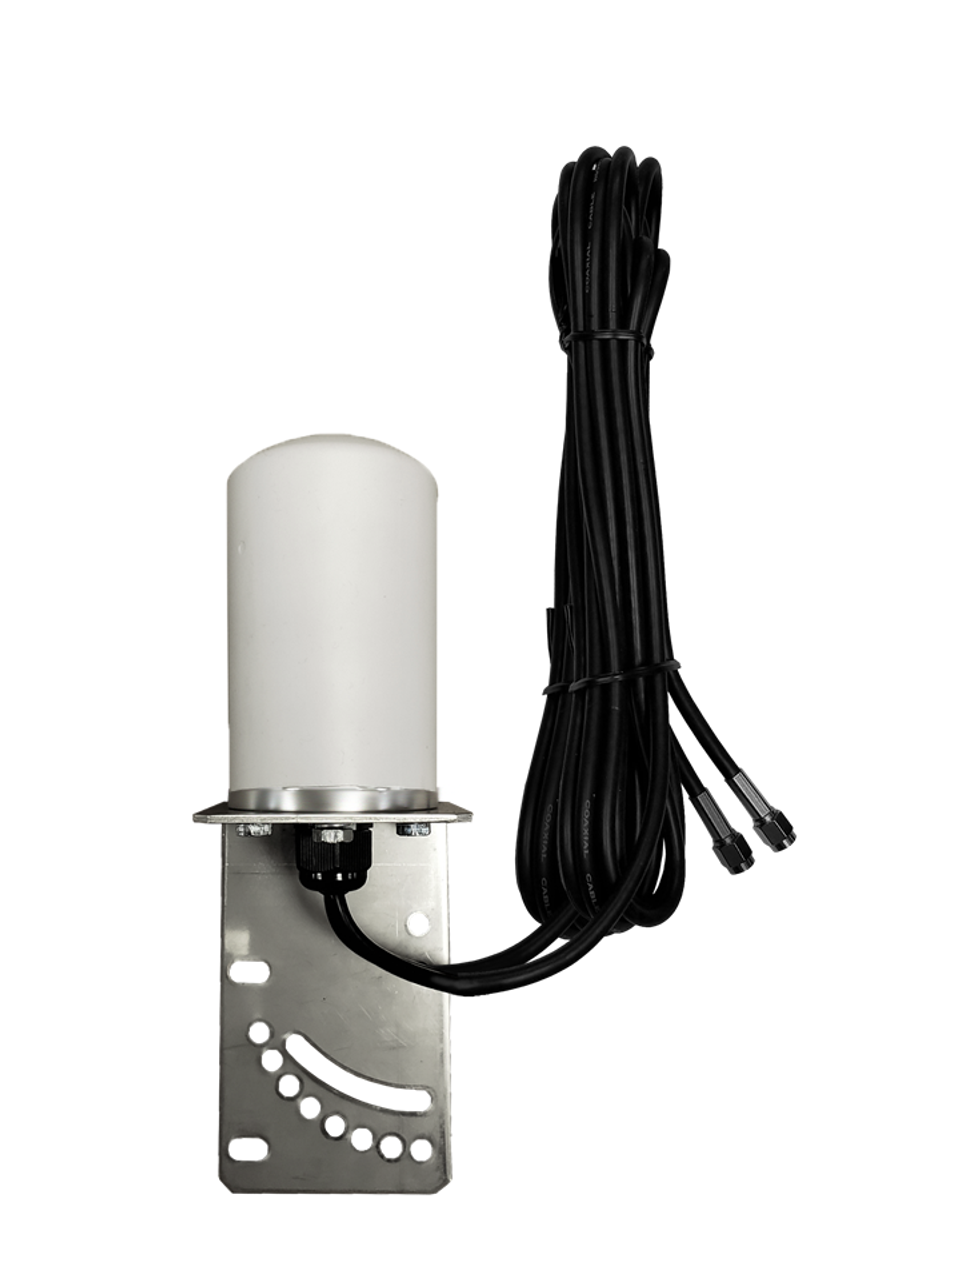 7dBi AT&T U115 Router Omni Directional MIMO Cellular 4G 5G LTE AWS XLTE M2M IoT Antenna w/16ft Coax Cables -2  x SMA